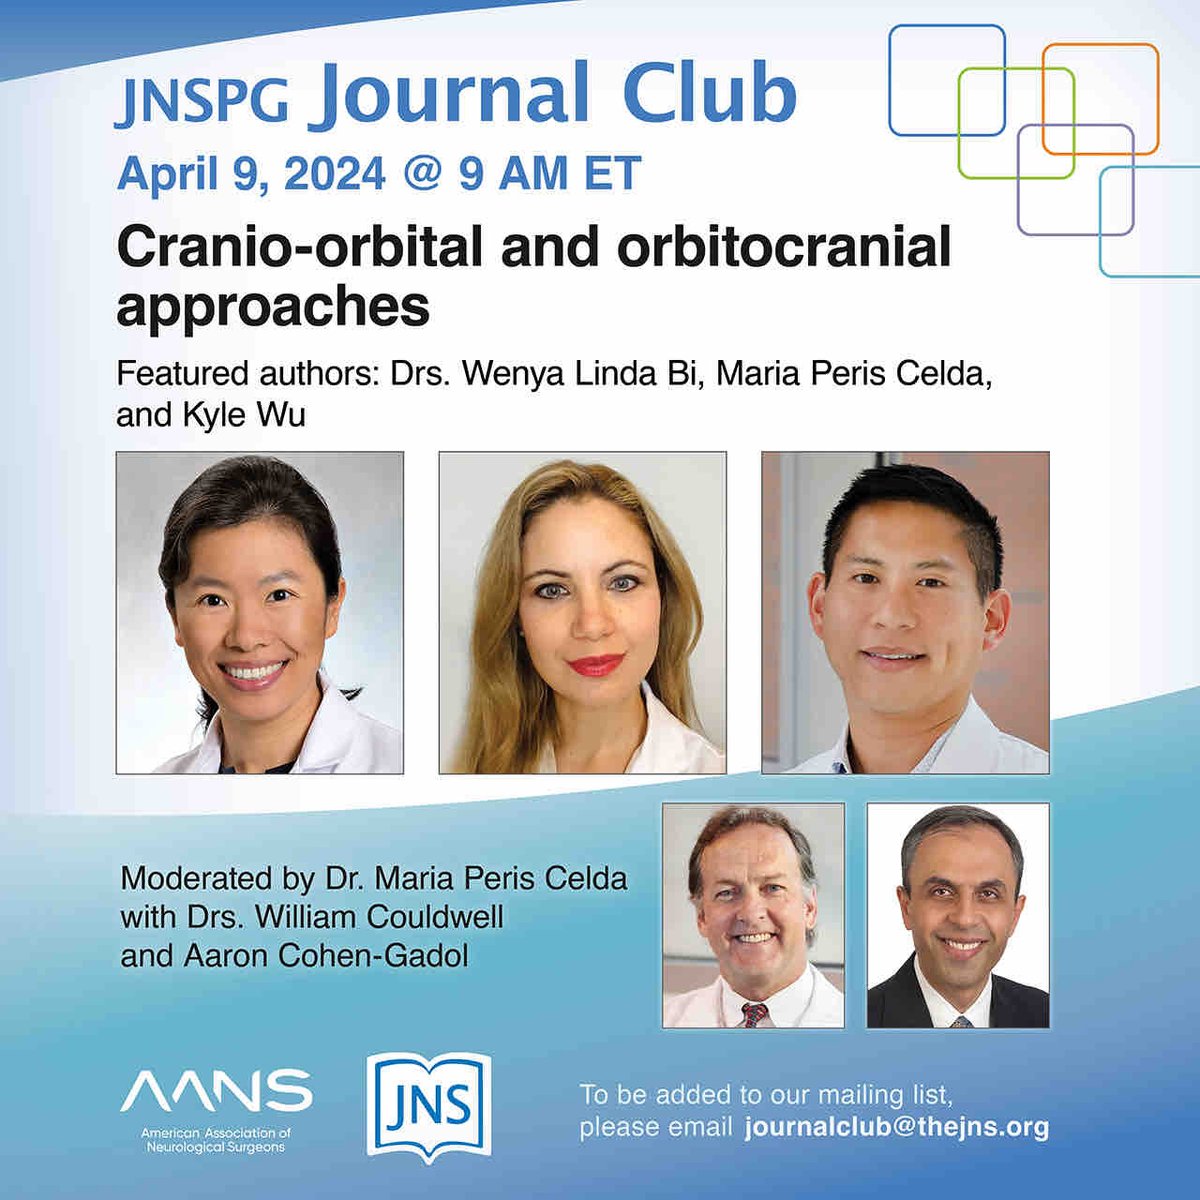 #JNSJournalClub April 9, 2024 @ 9am Cranio-orbital and orbitocranial approaches. To be added to our mailing list, please email journalclub@thejns.org Neurosurgical Atlas attendee link: us02web.zoom.us/webinar/regist…